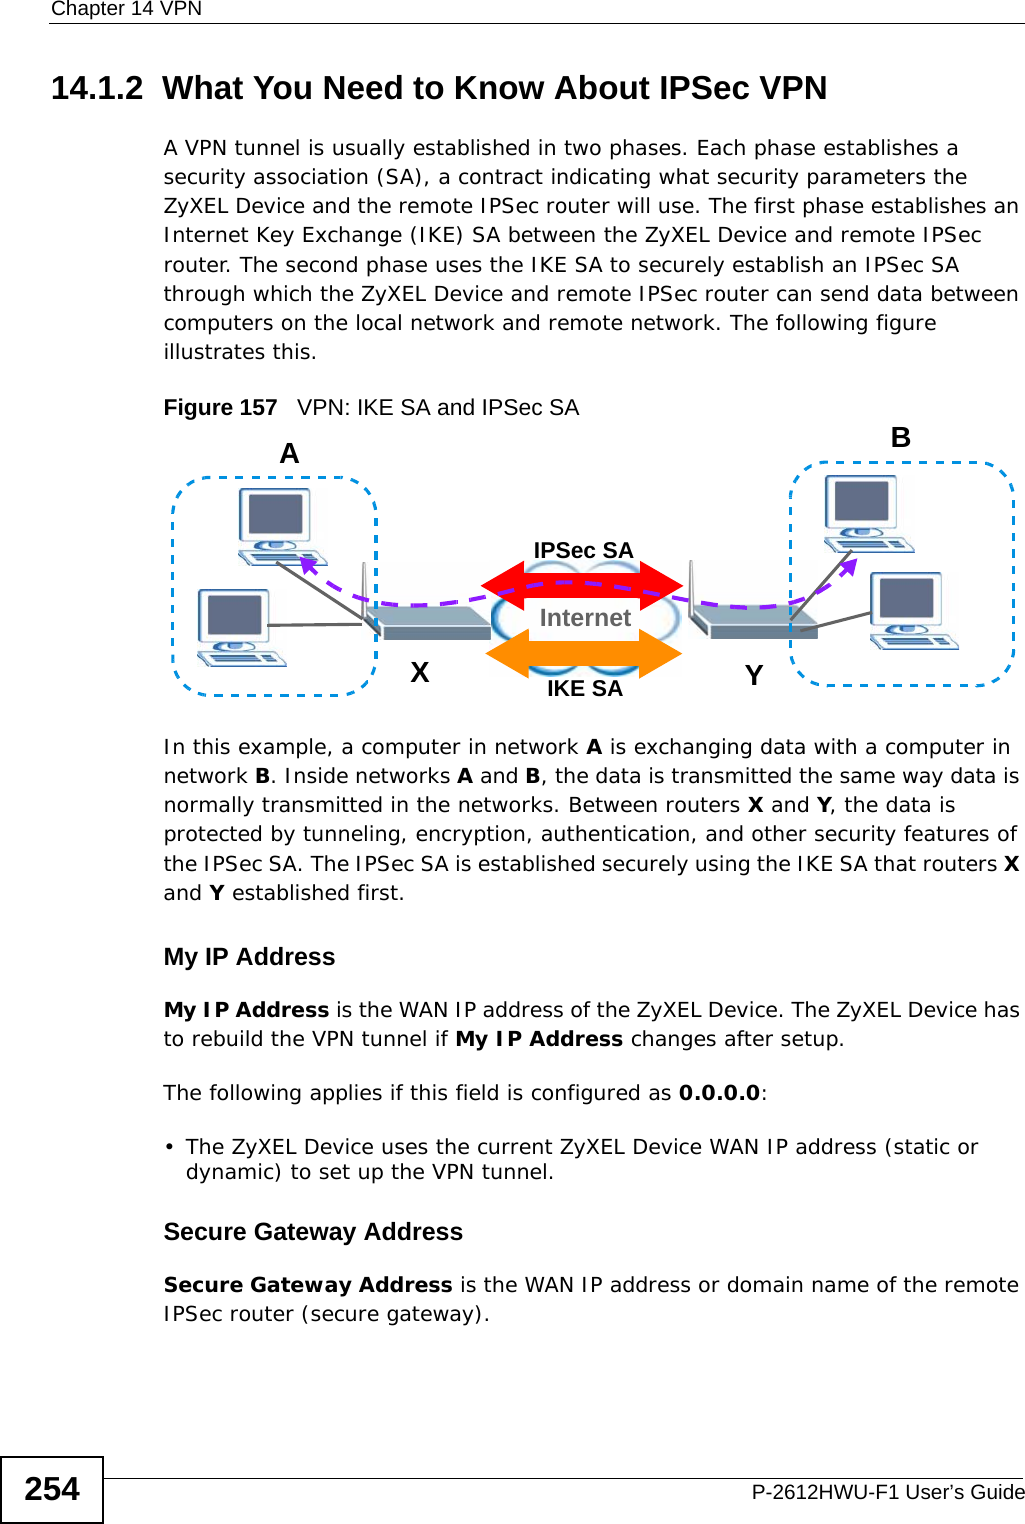 Chapter 14 VPNP-2612HWU-F1 User’s Guide25414.1.2  What You Need to Know About IPSec VPNA VPN tunnel is usually established in two phases. Each phase establishes a security association (SA), a contract indicating what security parameters the ZyXEL Device and the remote IPSec router will use. The first phase establishes an Internet Key Exchange (IKE) SA between the ZyXEL Device and remote IPSec router. The second phase uses the IKE SA to securely establish an IPSec SA through which the ZyXEL Device and remote IPSec router can send data between computers on the local network and remote network. The following figure illustrates this.Figure 157   VPN: IKE SA and IPSec SA In this example, a computer in network A is exchanging data with a computer in network B. Inside networks A and B, the data is transmitted the same way data is normally transmitted in the networks. Between routers X and Y, the data is protected by tunneling, encryption, authentication, and other security features of the IPSec SA. The IPSec SA is established securely using the IKE SA that routers X and Y established first.My IP AddressMy IP Address is the WAN IP address of the ZyXEL Device. The ZyXEL Device has to rebuild the VPN tunnel if My IP Address changes after setup.The following applies if this field is configured as 0.0.0.0:• The ZyXEL Device uses the current ZyXEL Device WAN IP address (static or dynamic) to set up the VPN tunnel. Secure Gateway AddressSecure Gateway Address is the WAN IP address or domain name of the remote IPSec router (secure gateway).AXYInternetBIPSec SAIKE SA